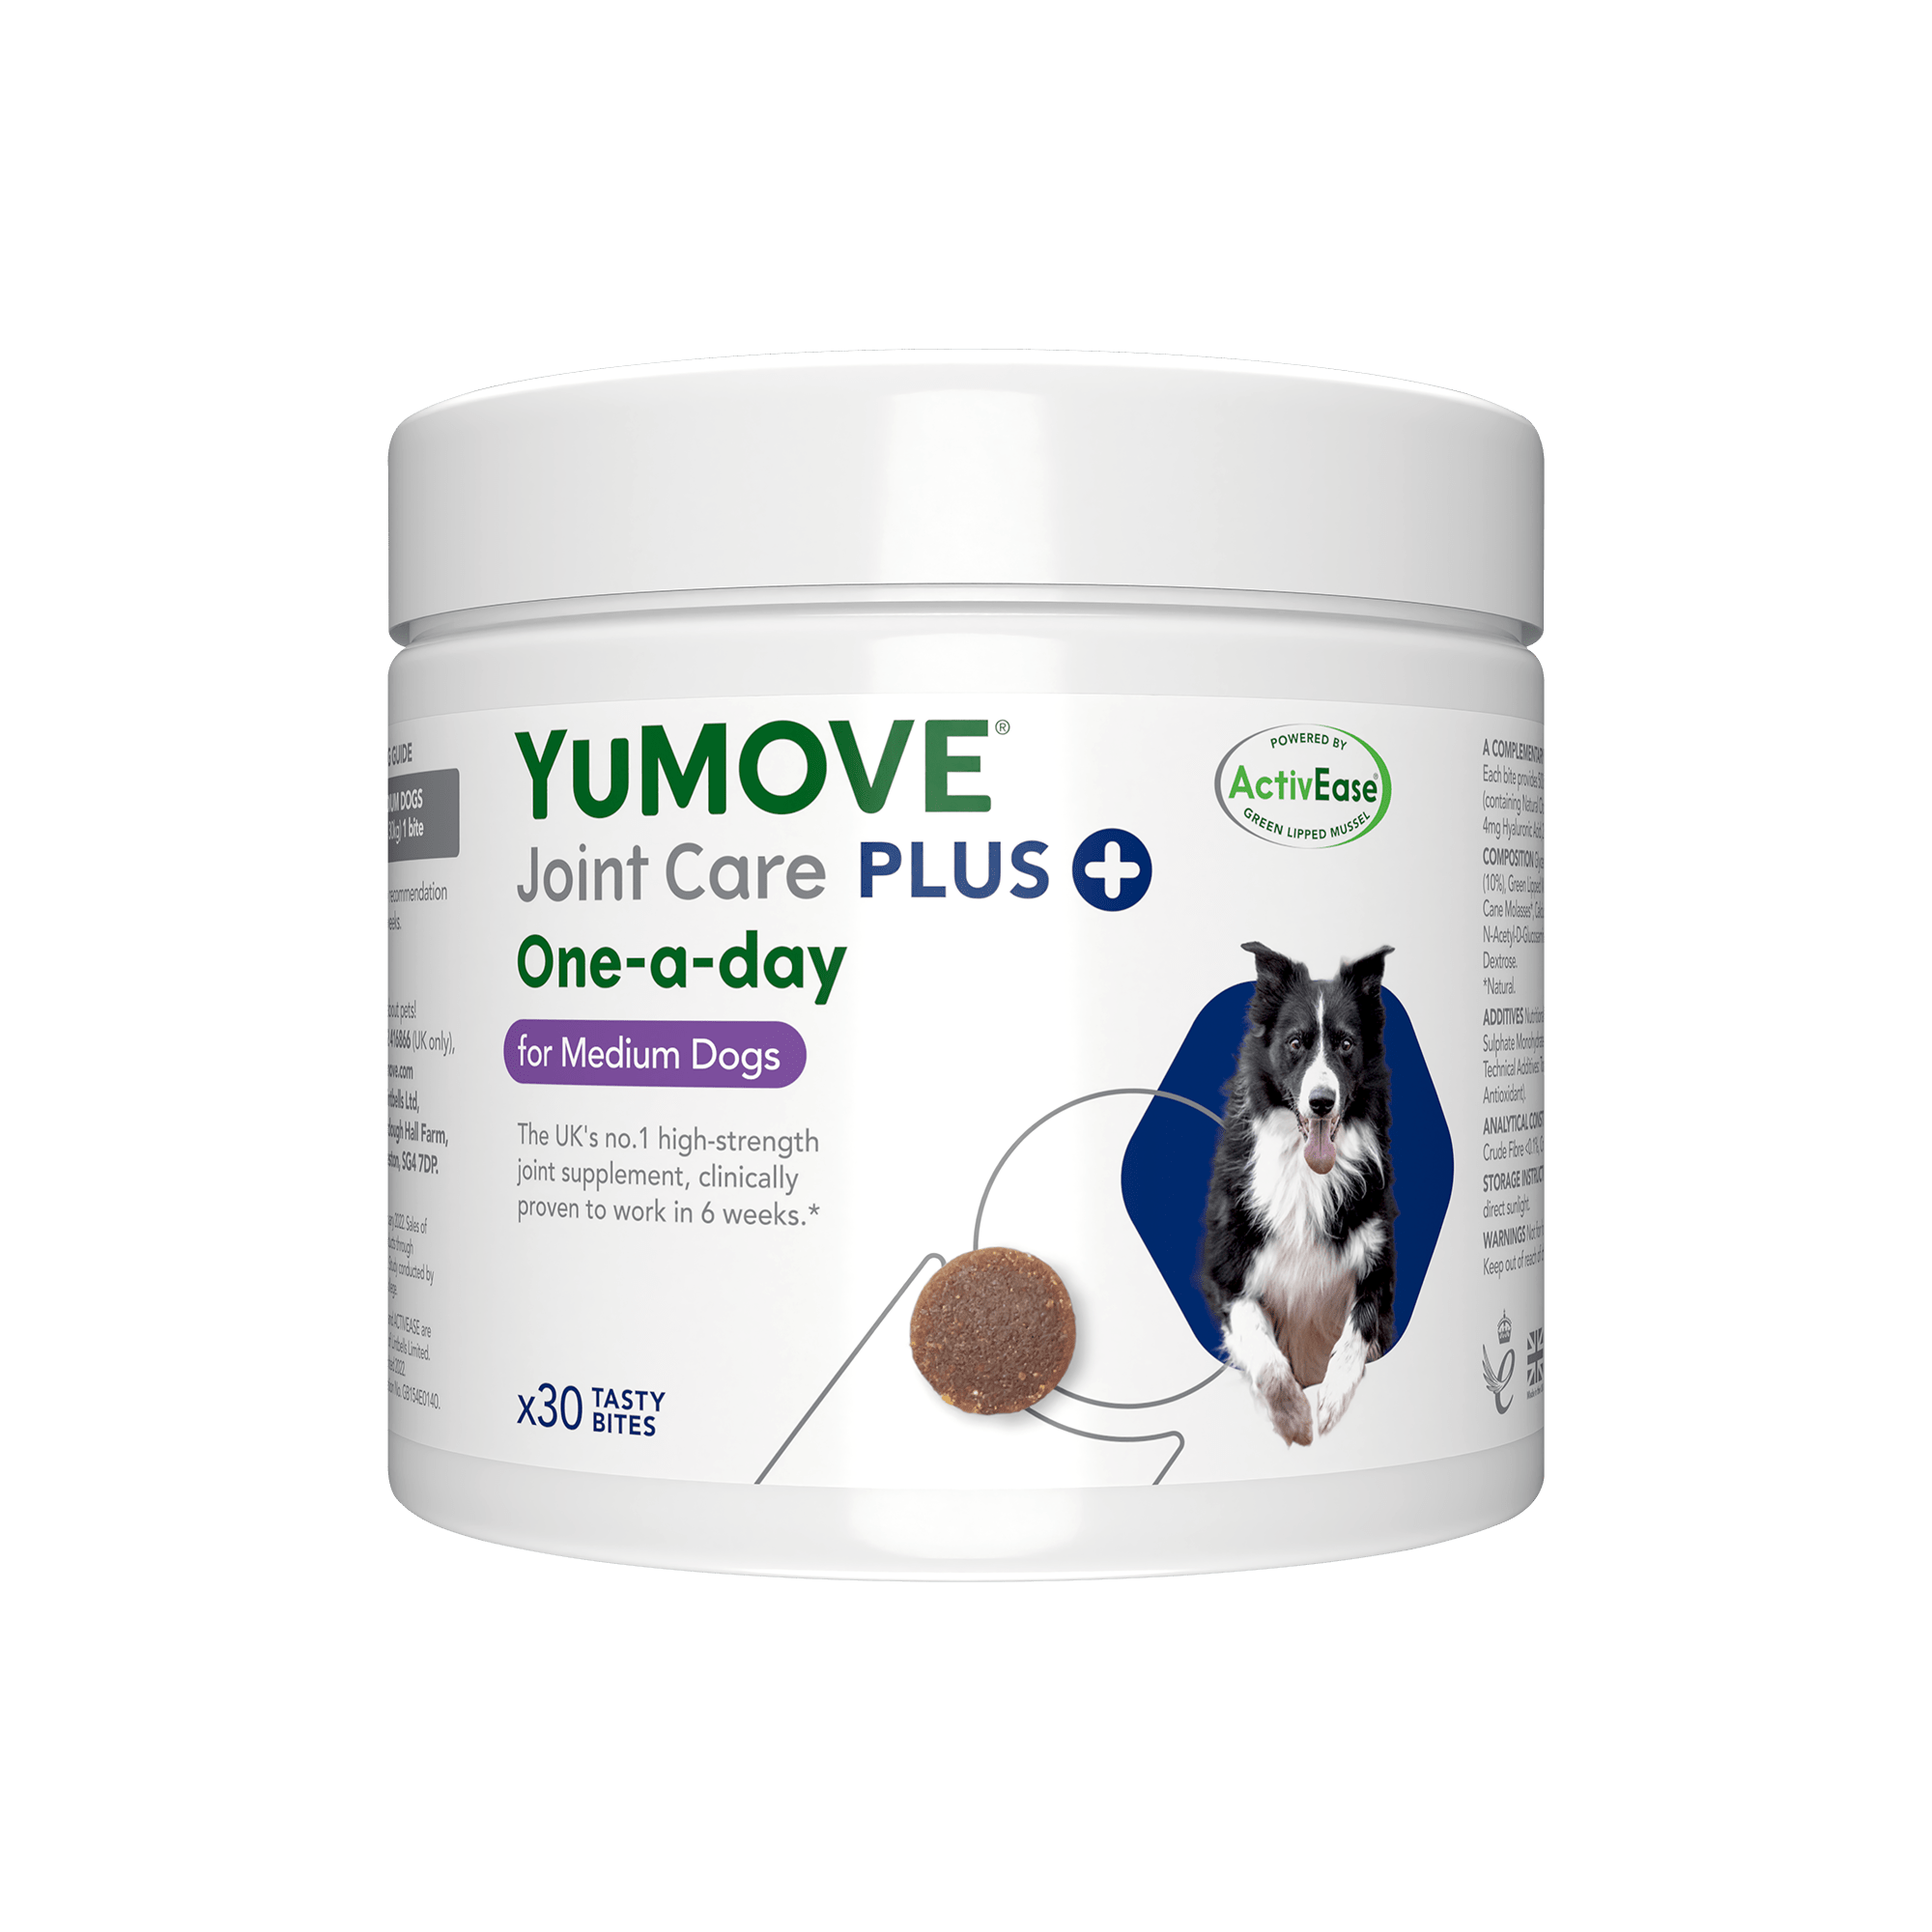 Joint Care PLUS One-a-day for Dogs